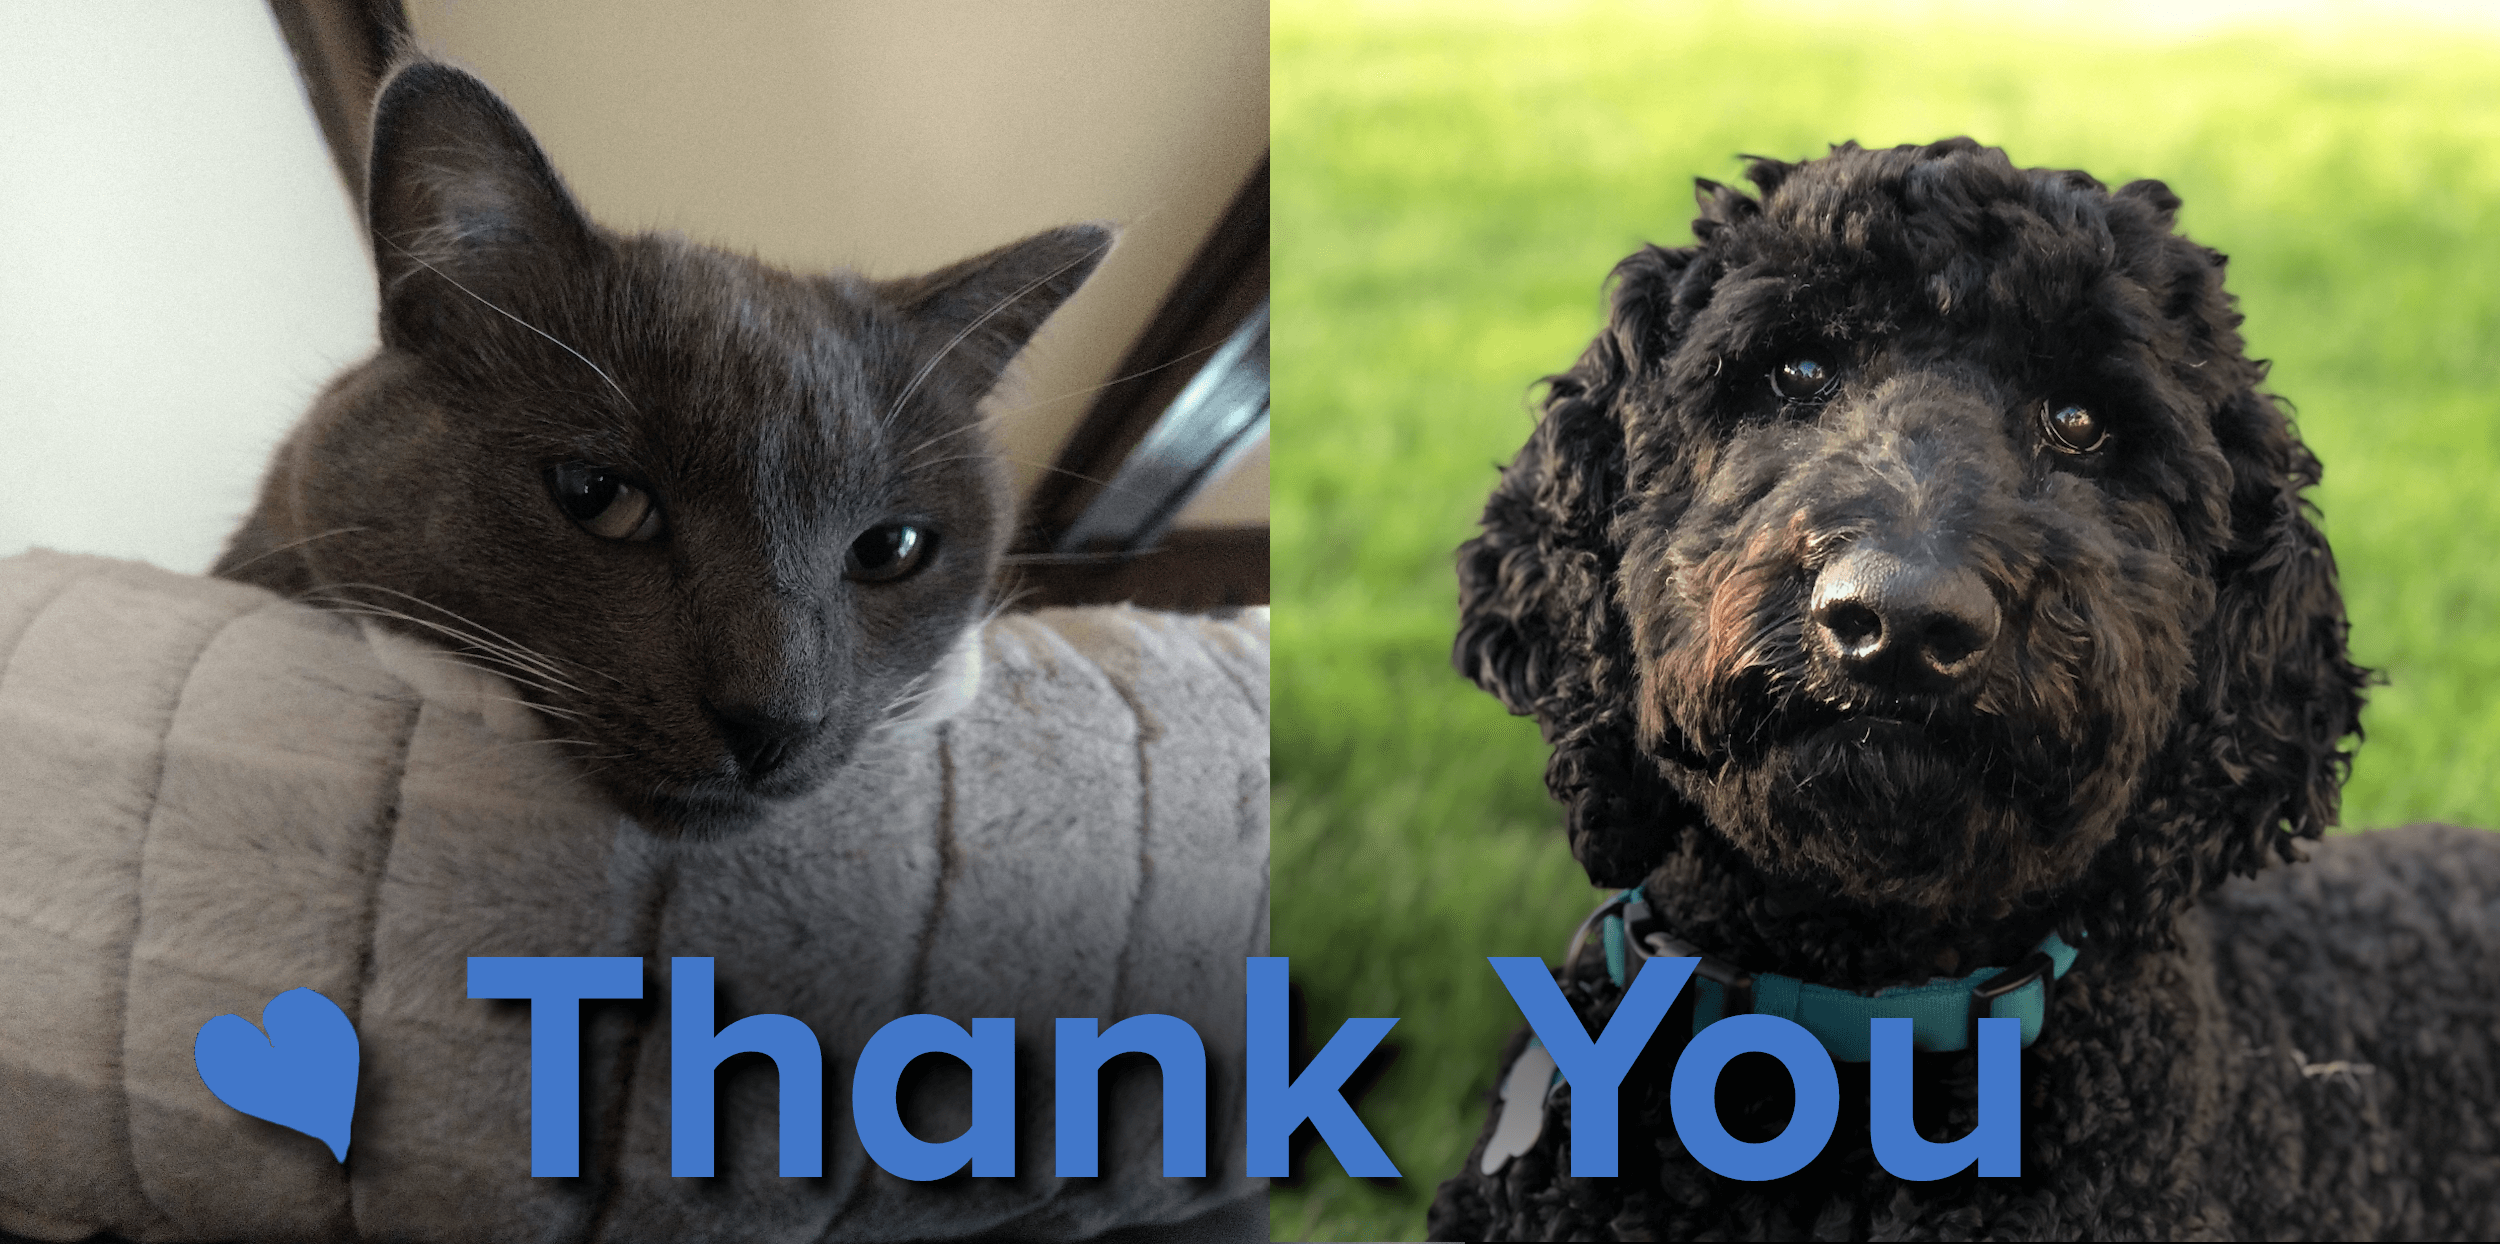 grey cat and black dog above the words Thank you